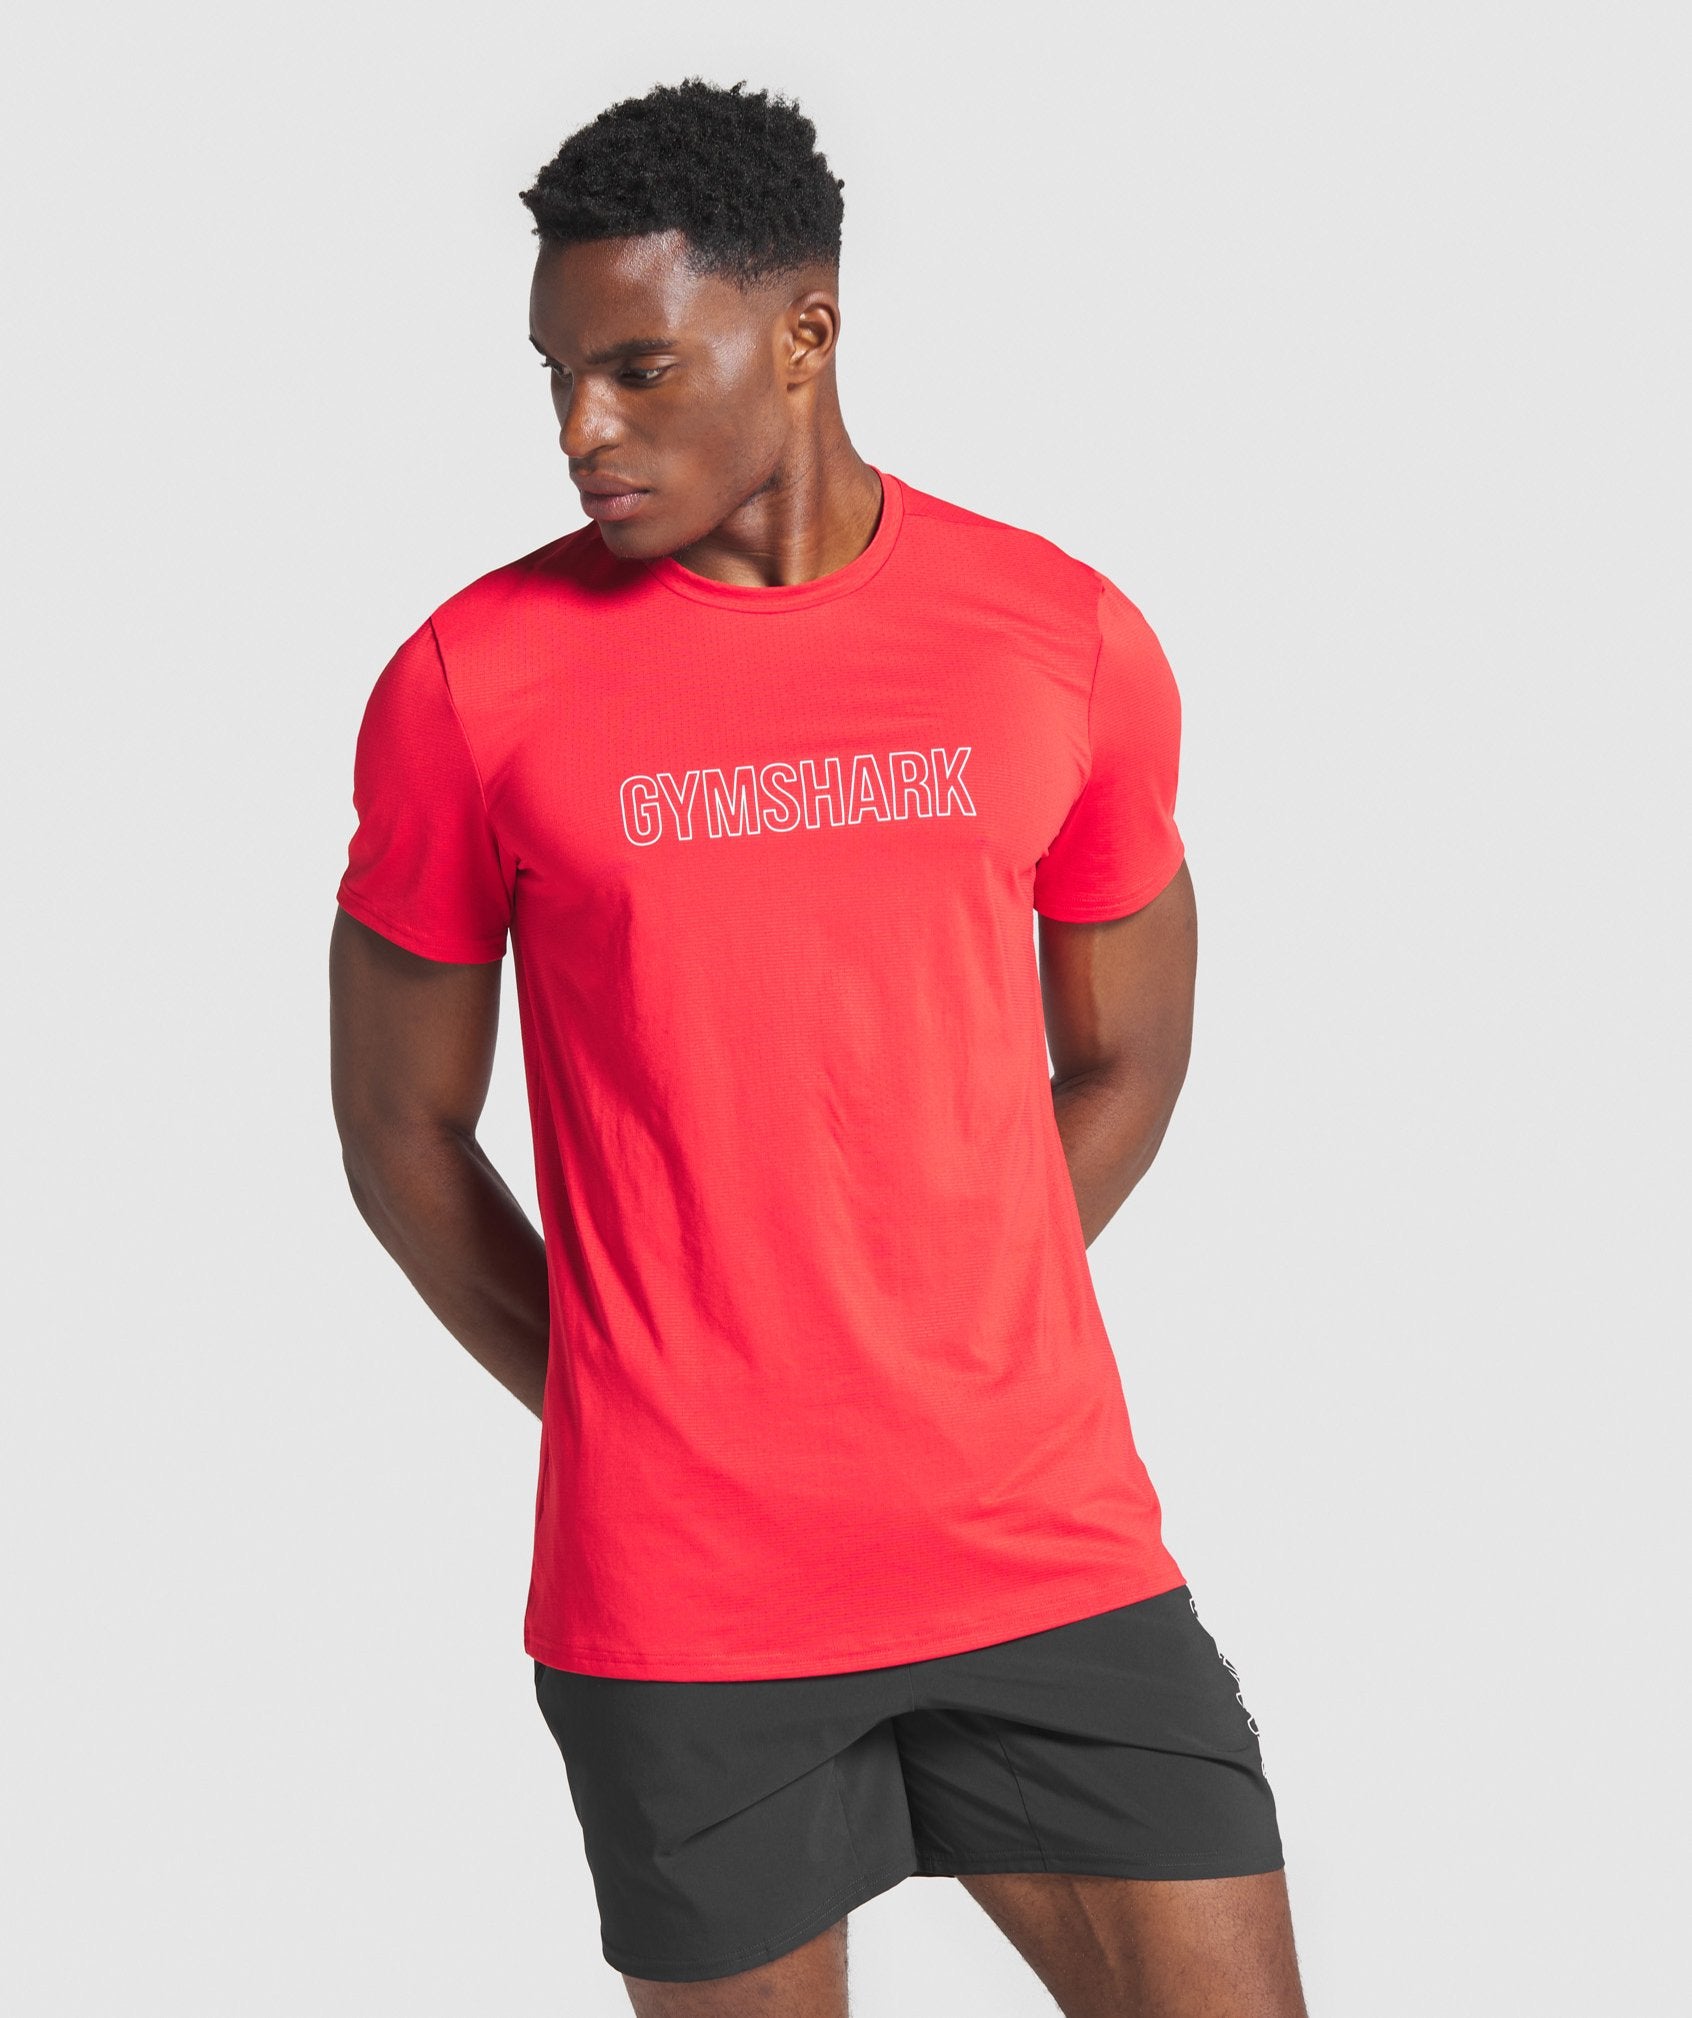 Arrival Graphic T-Shirt in Red